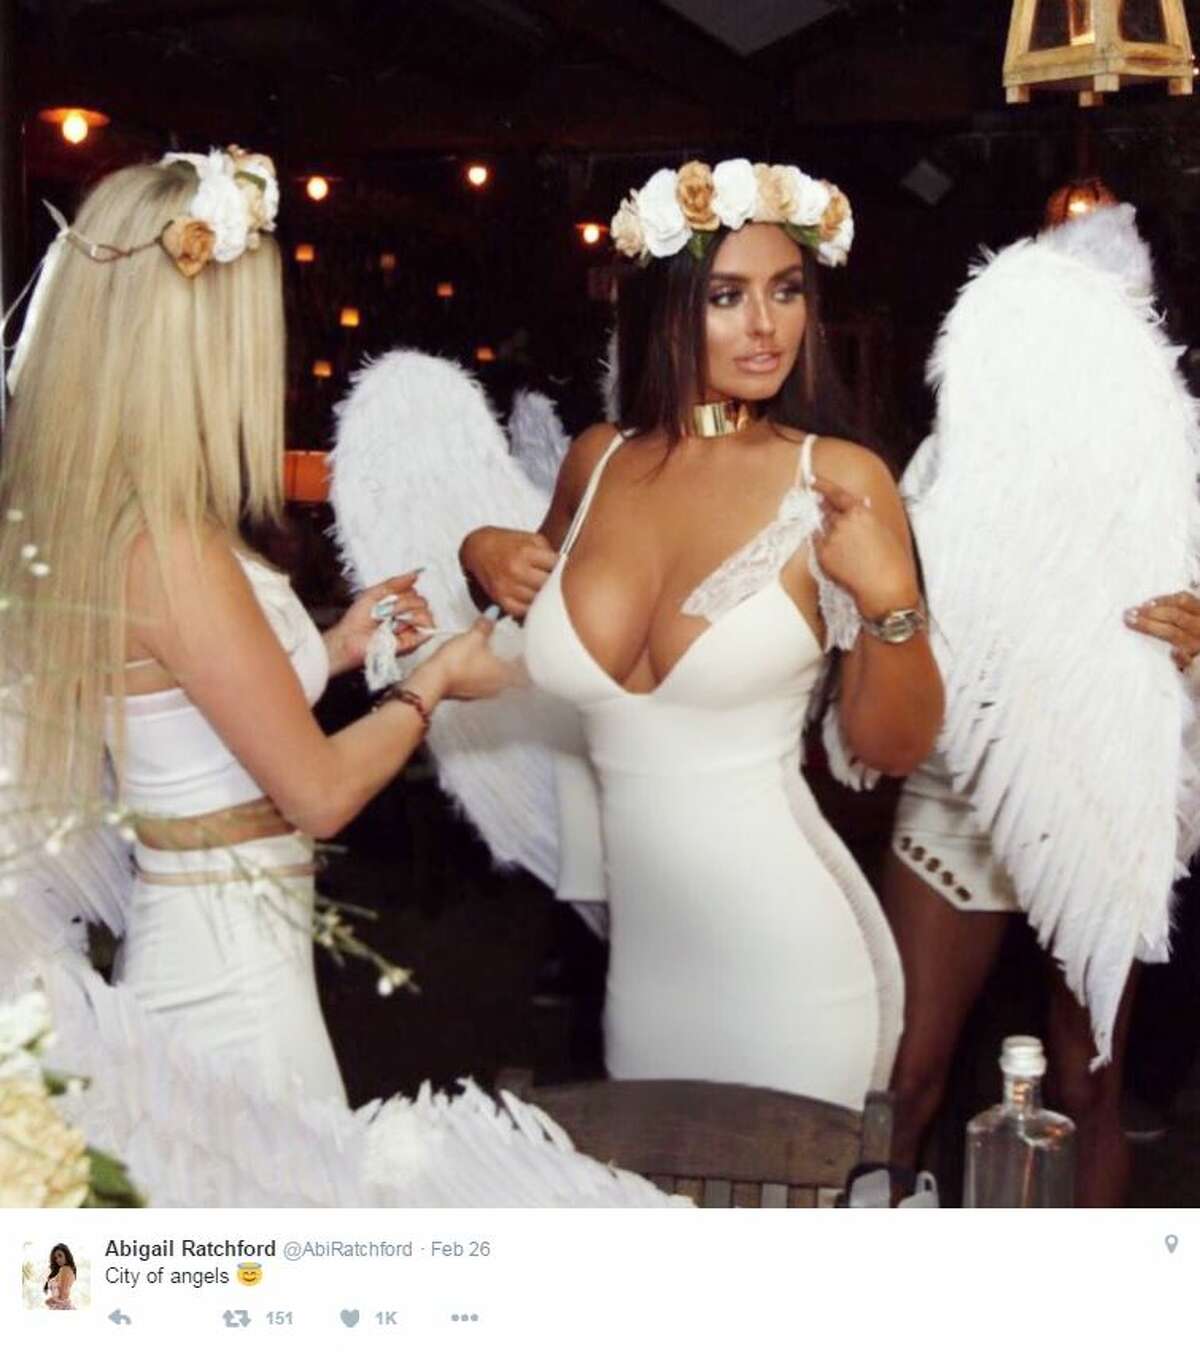 Model Abigail Ratchford was seen hanging out with Johnny Manziel in Los Angeles. She said the two are "just friends," according to TMZ.com.